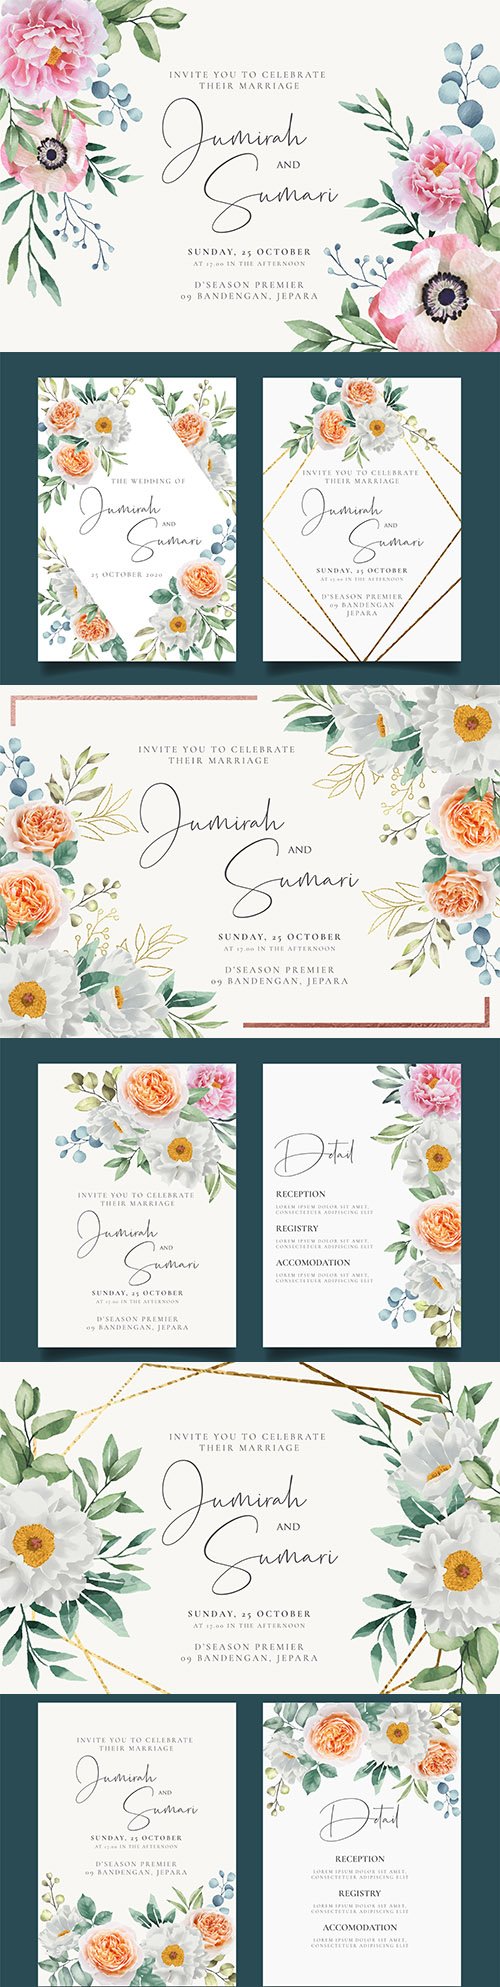 Elegant wedding invitation with floral watercolour background